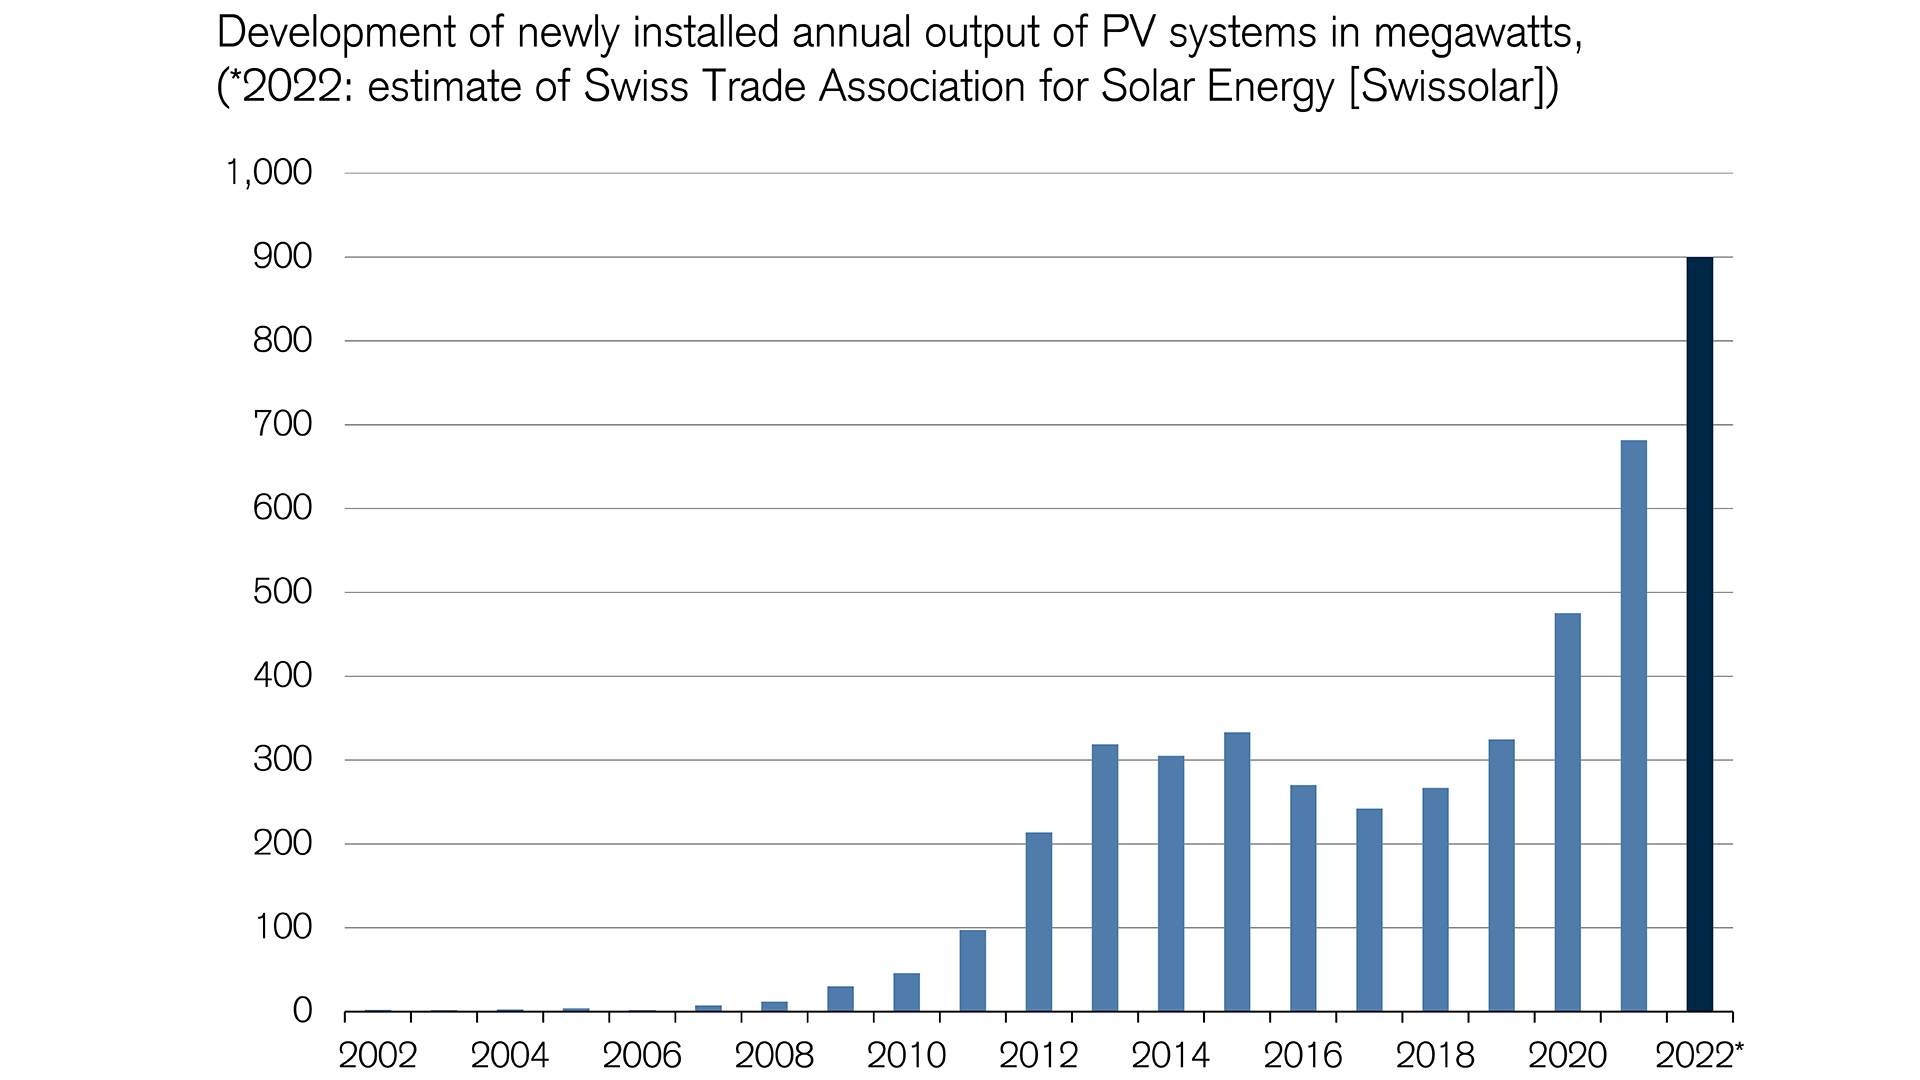 Energy prices: High demand for photovoltaic systems